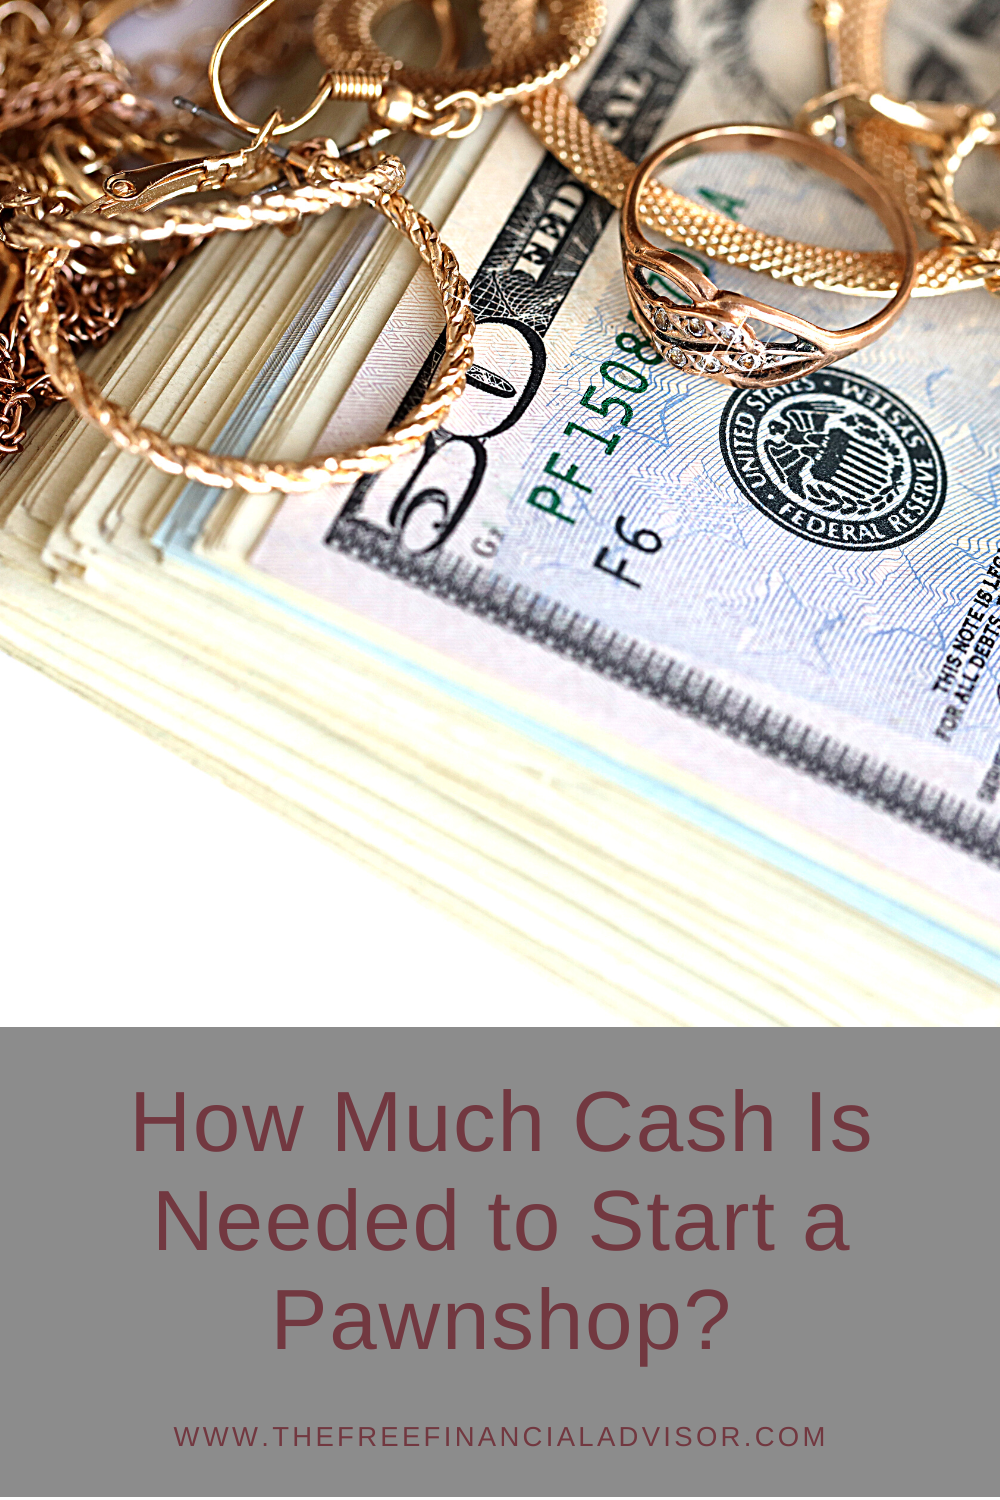 How Much Cash Is Needed to Start a Pawnshop